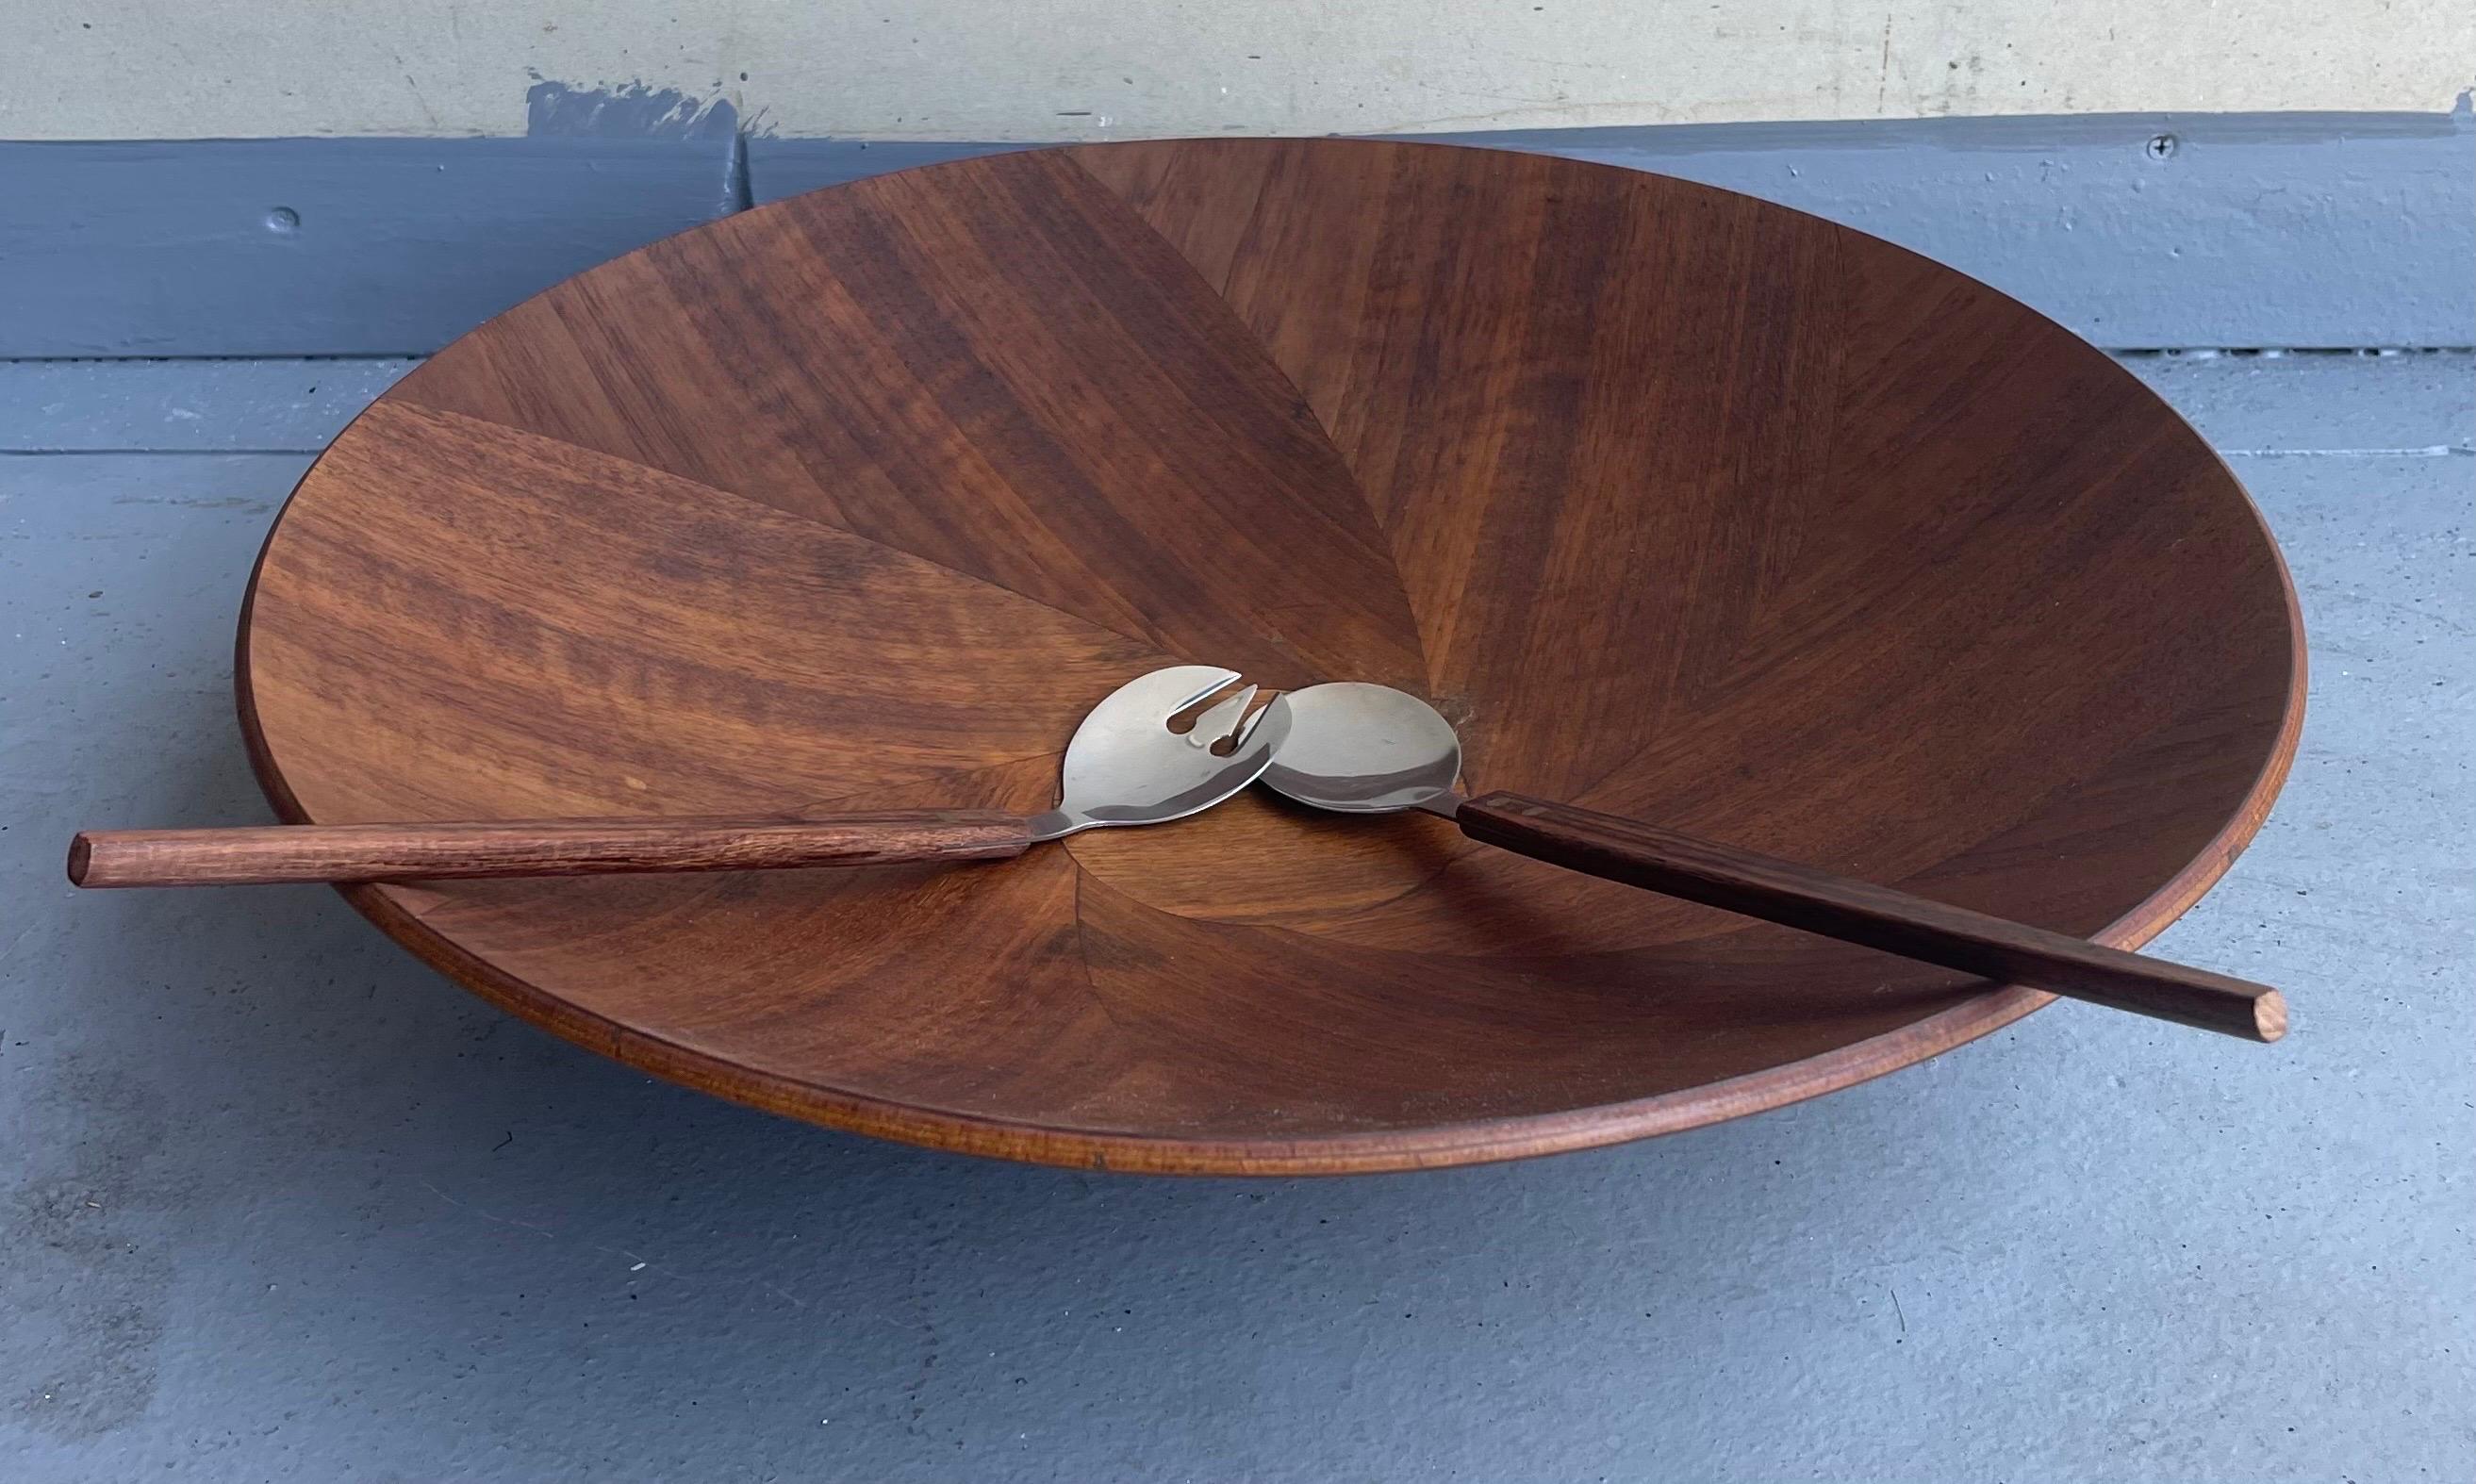 North American Large Inlaid Walnut Salad Bowl & Servers by Gladmark of California For Sale